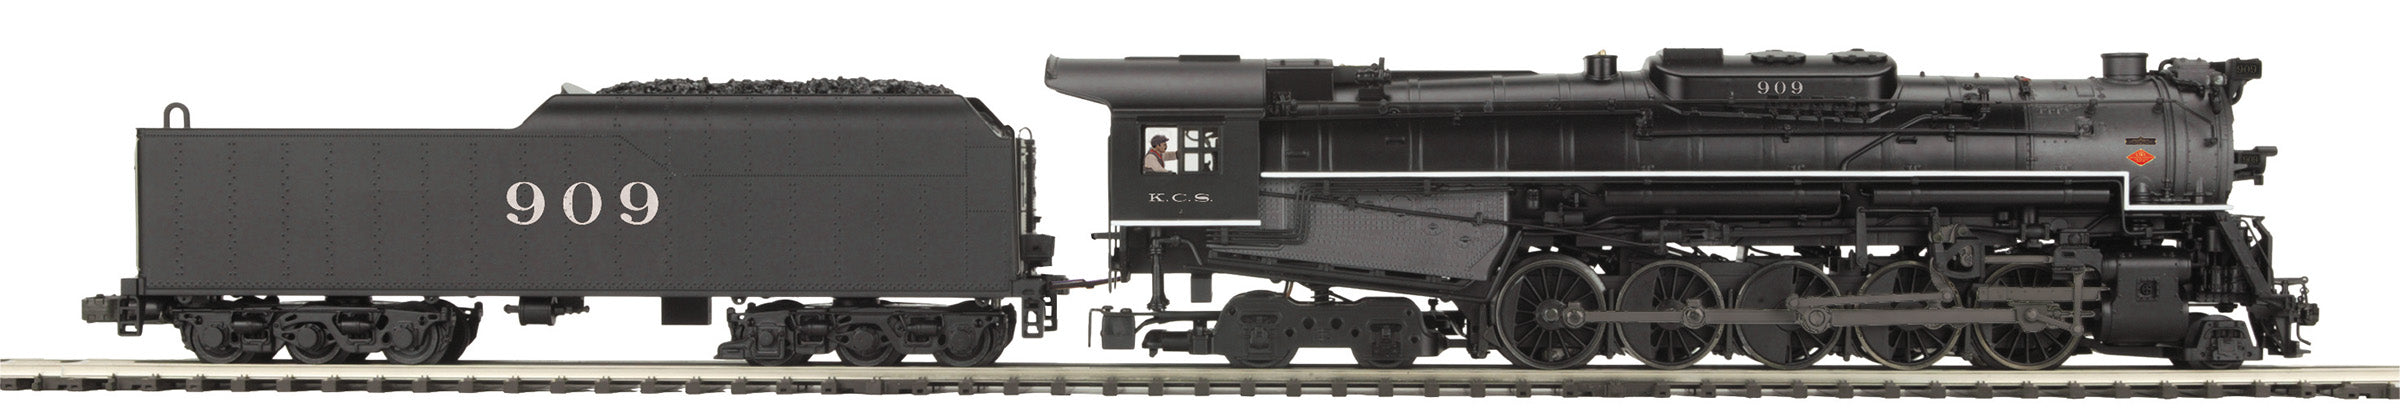 MTH 20-3860-1 - T1 2-10-4 Steam Engine "Kansas City Southern" #909 w/ PS3